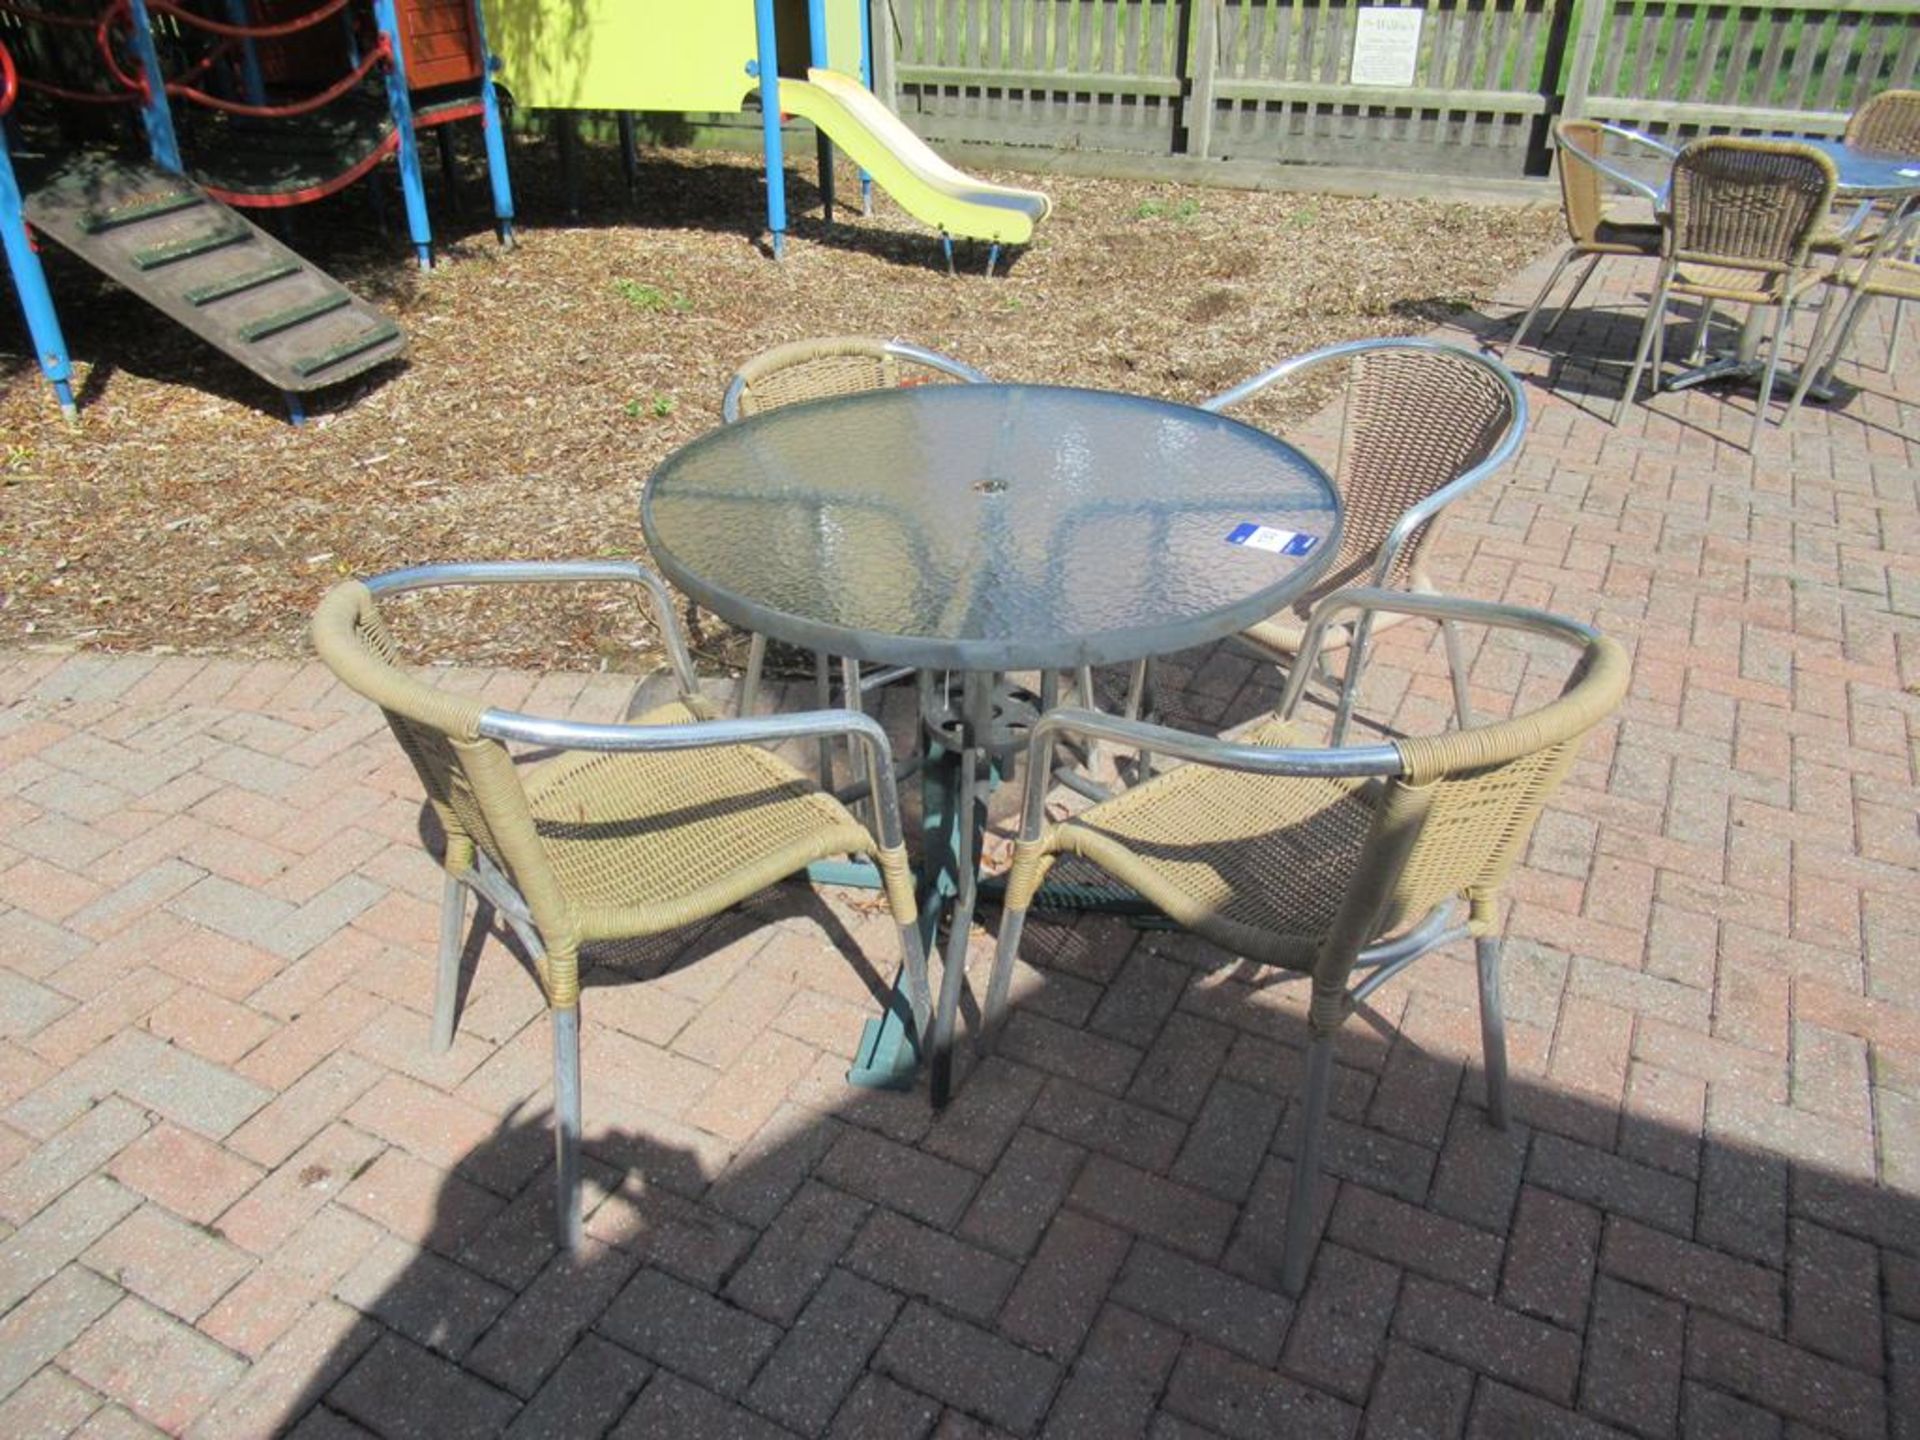 Metal Framed Circular Glass Top Garden Table and 4 x Matching Metal Framed Garden Chairs - Image 2 of 2